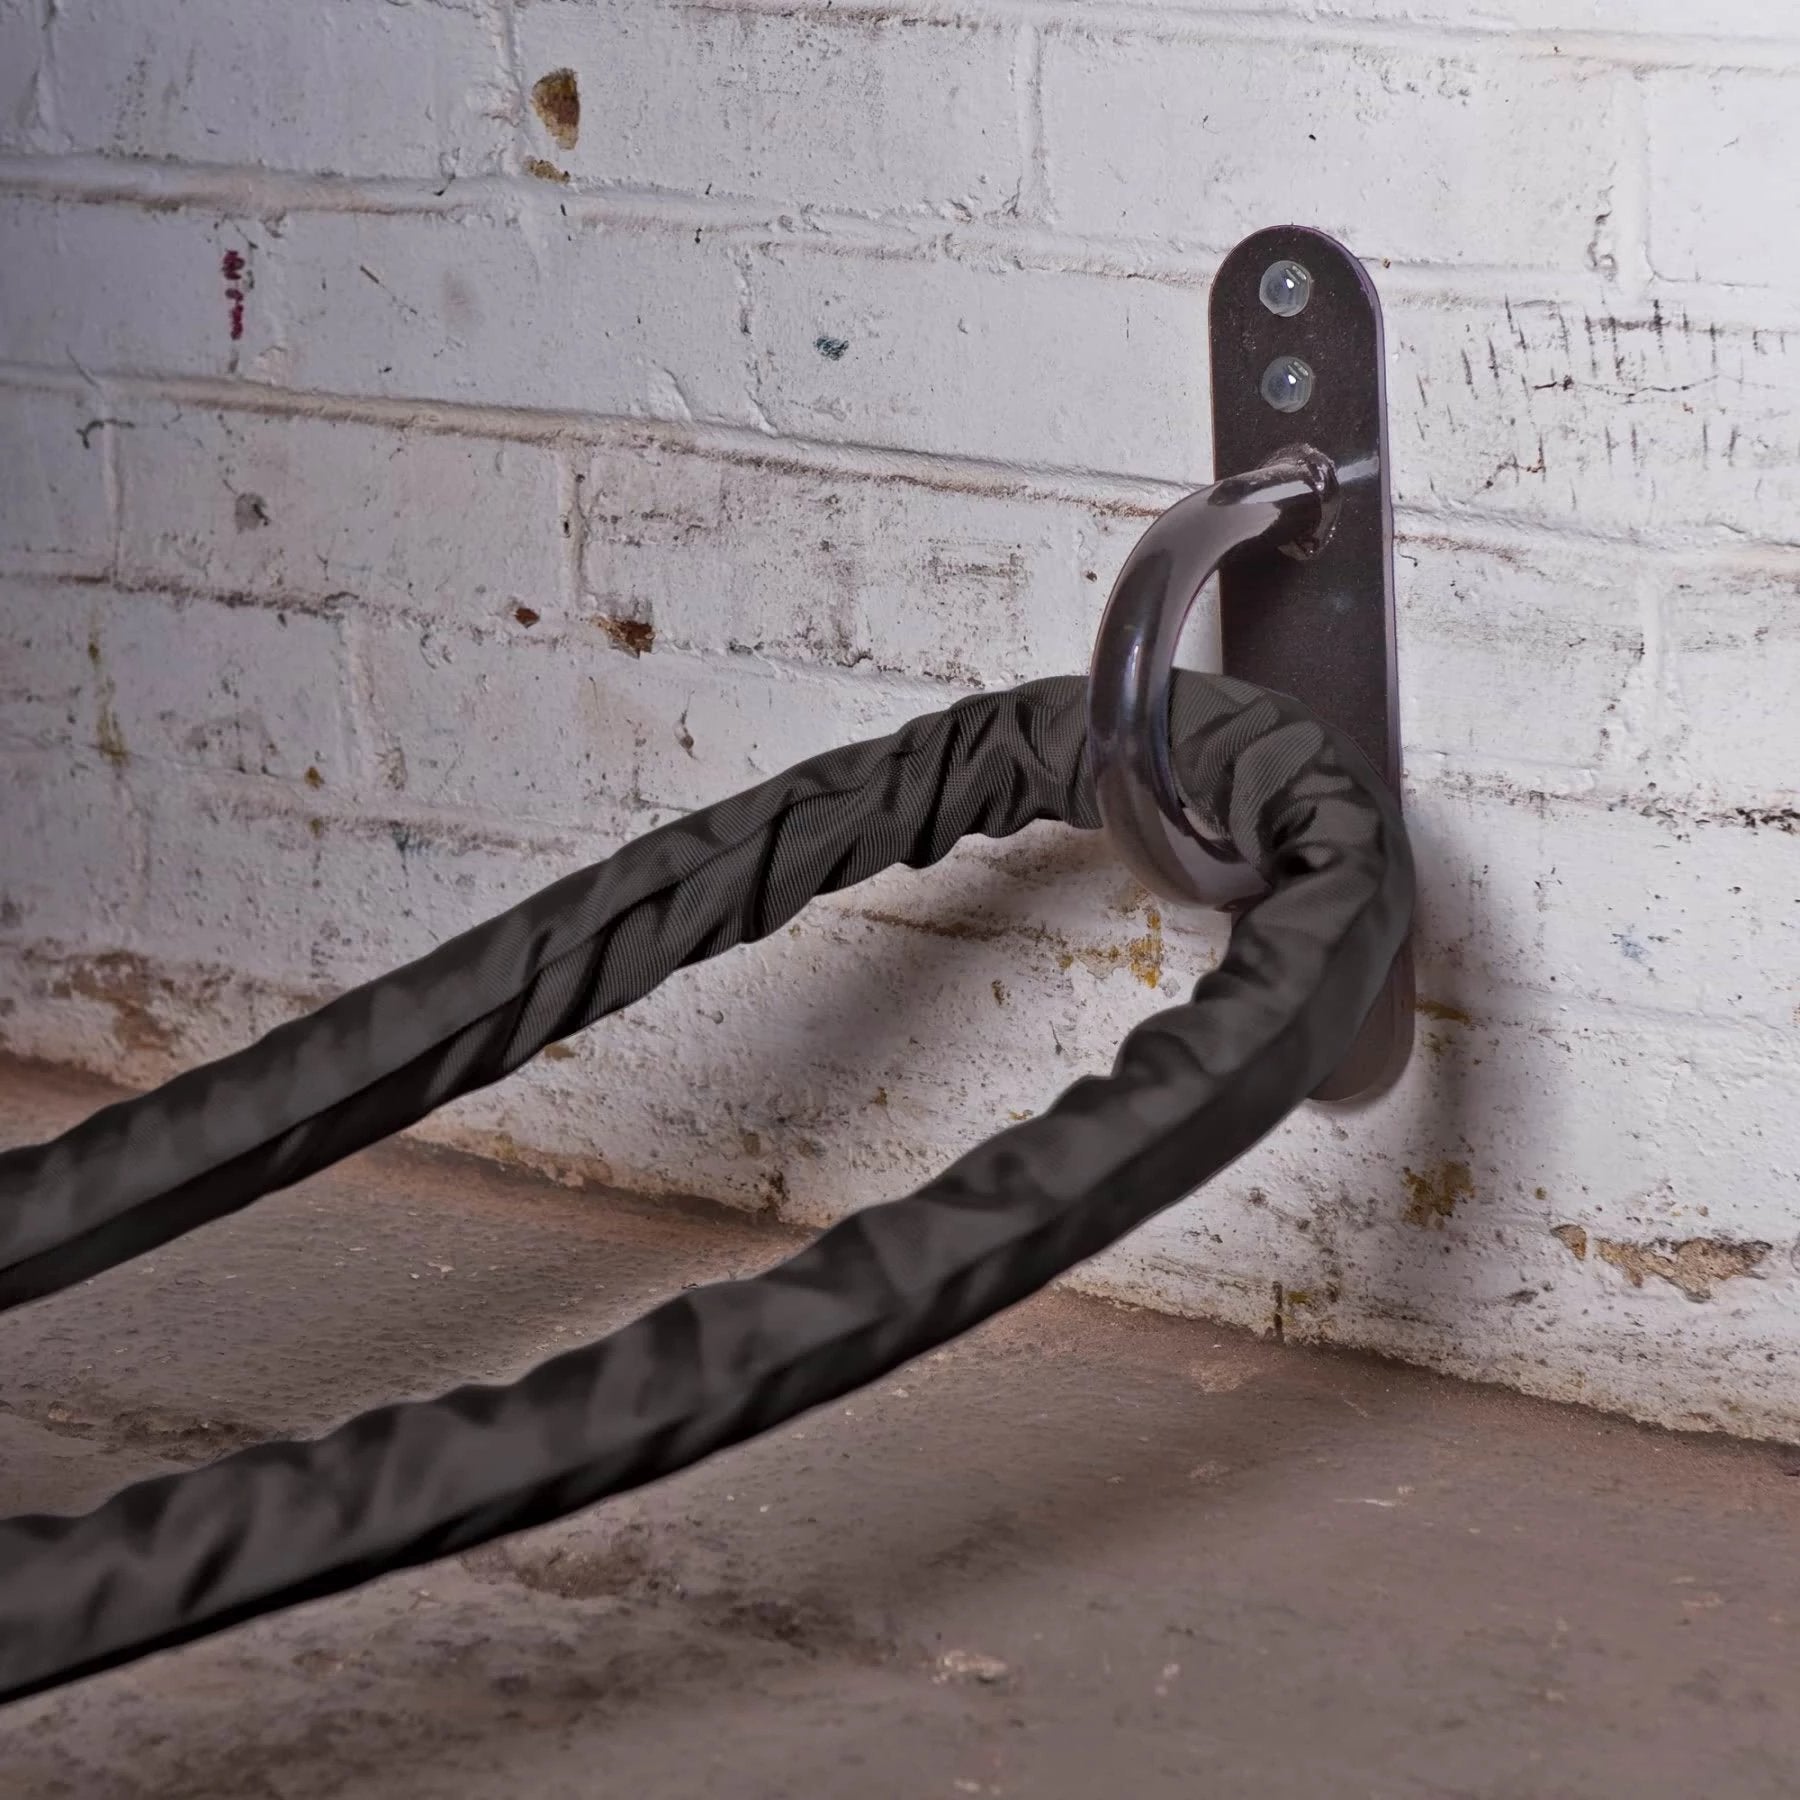 TKO Wall Mounted Battle Rope Anchor in use.